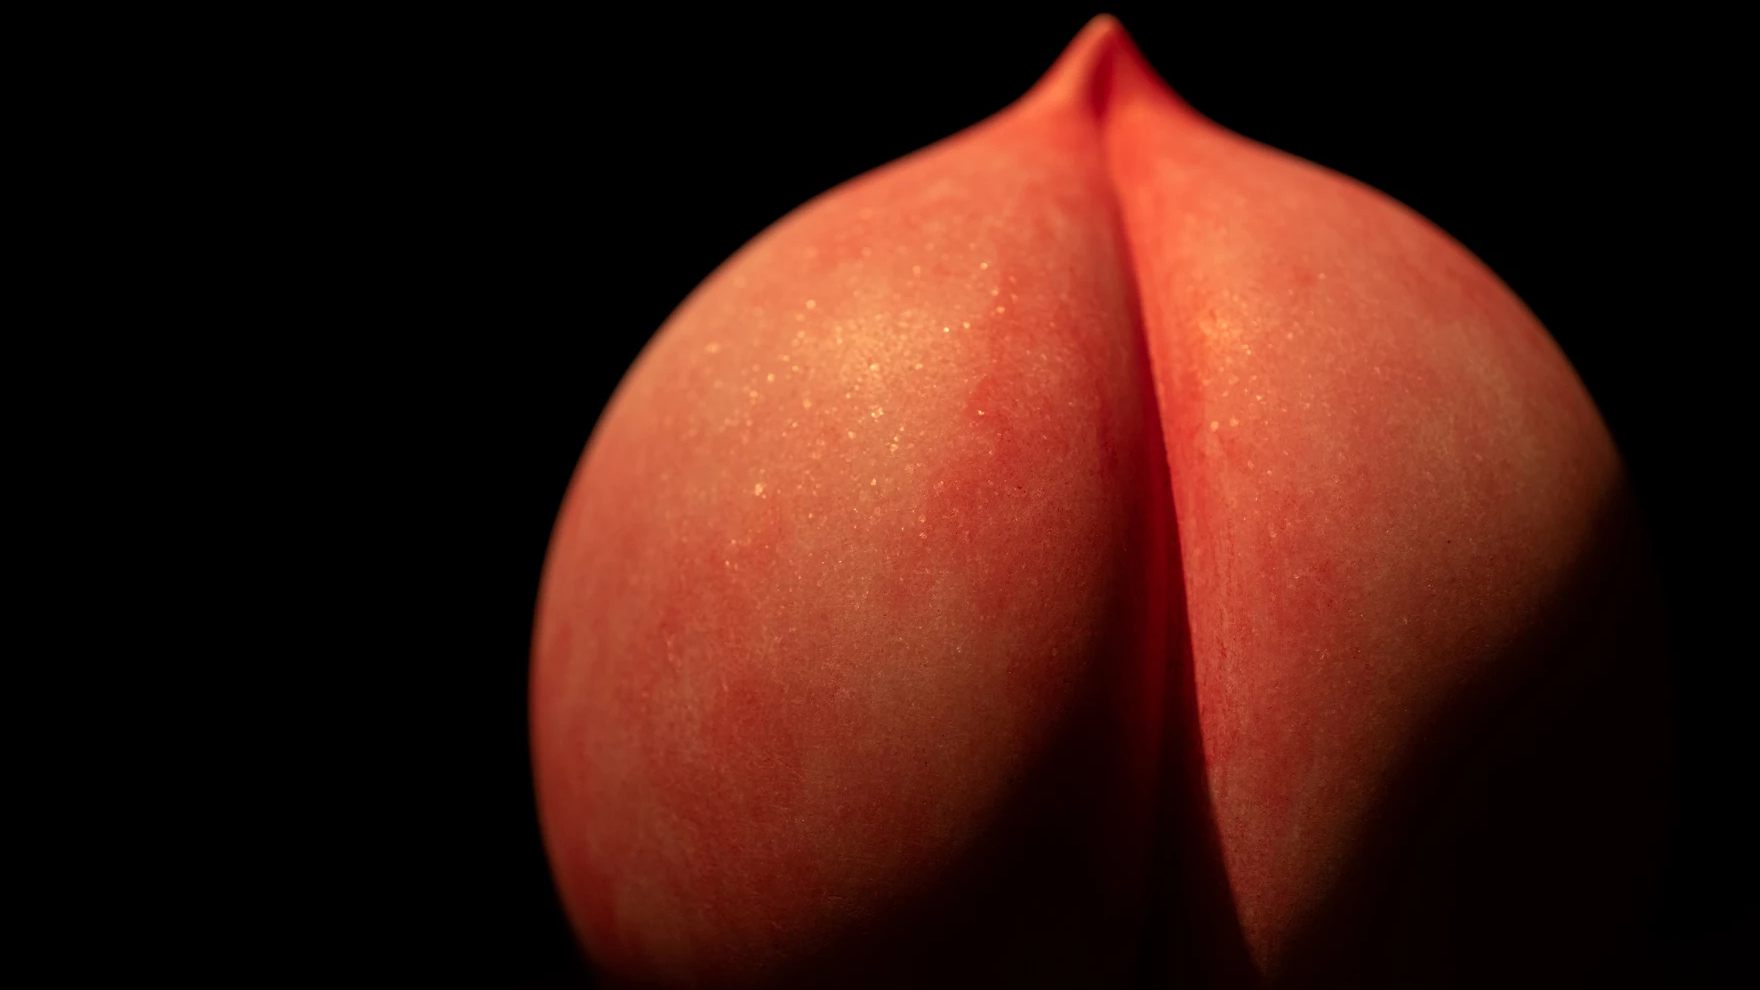 image of a peach, anal play guide, anal sex tips